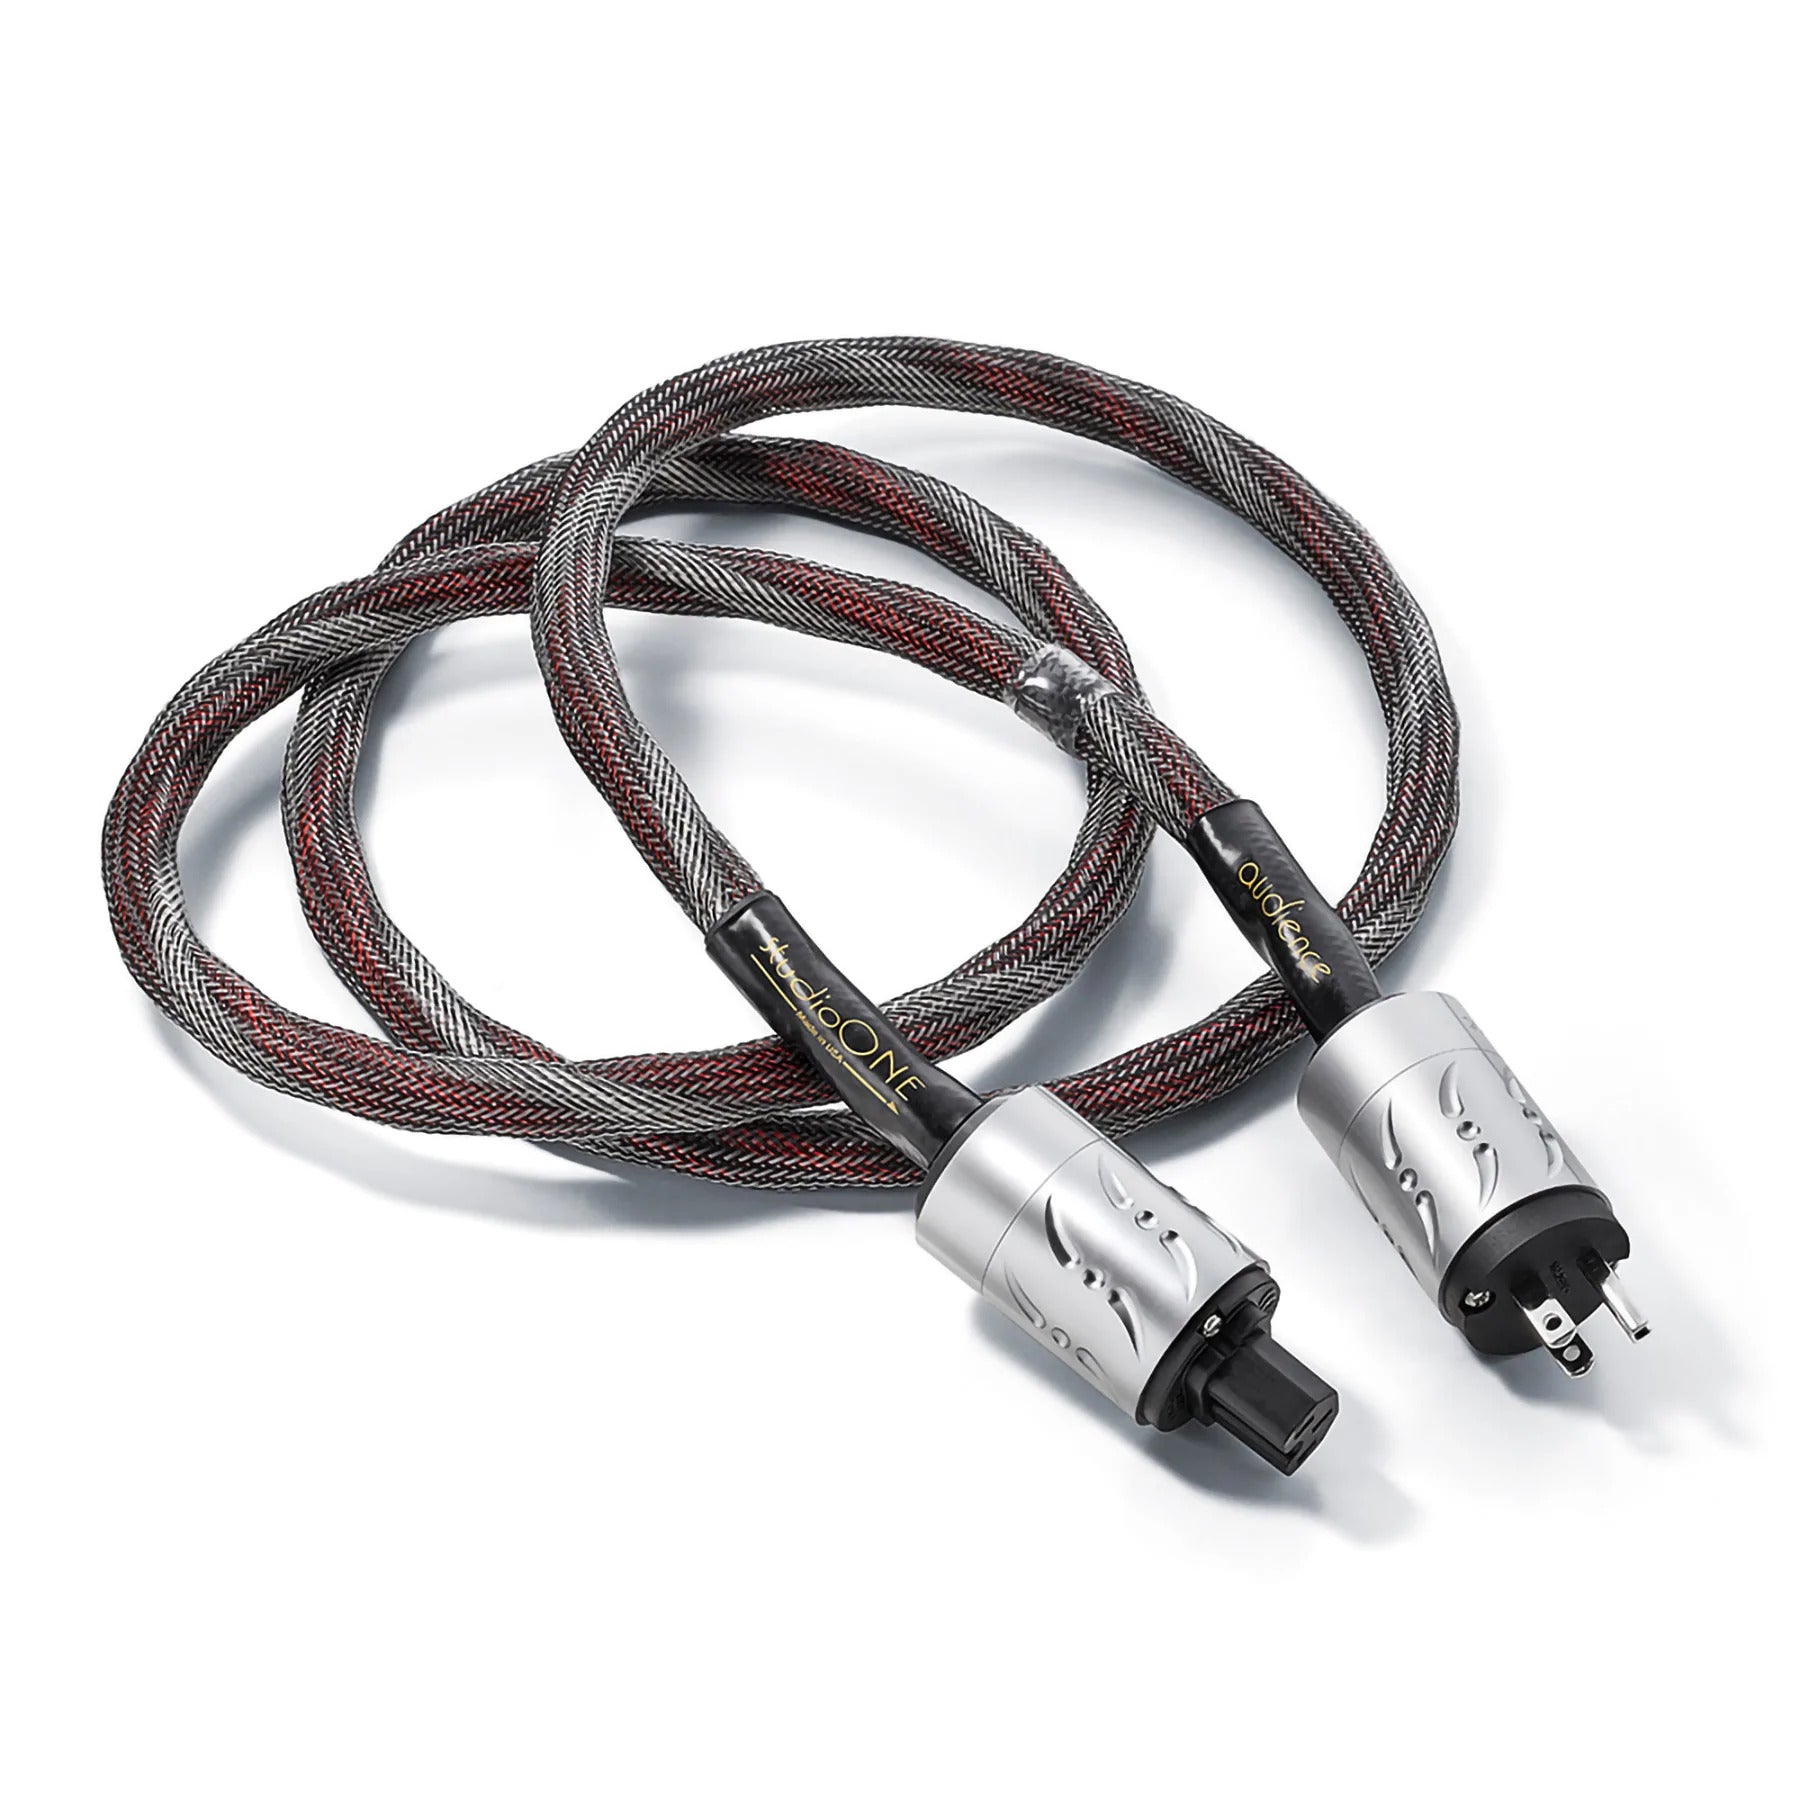 Audience STUDIO ONE MP AUS-IEC Power Cable